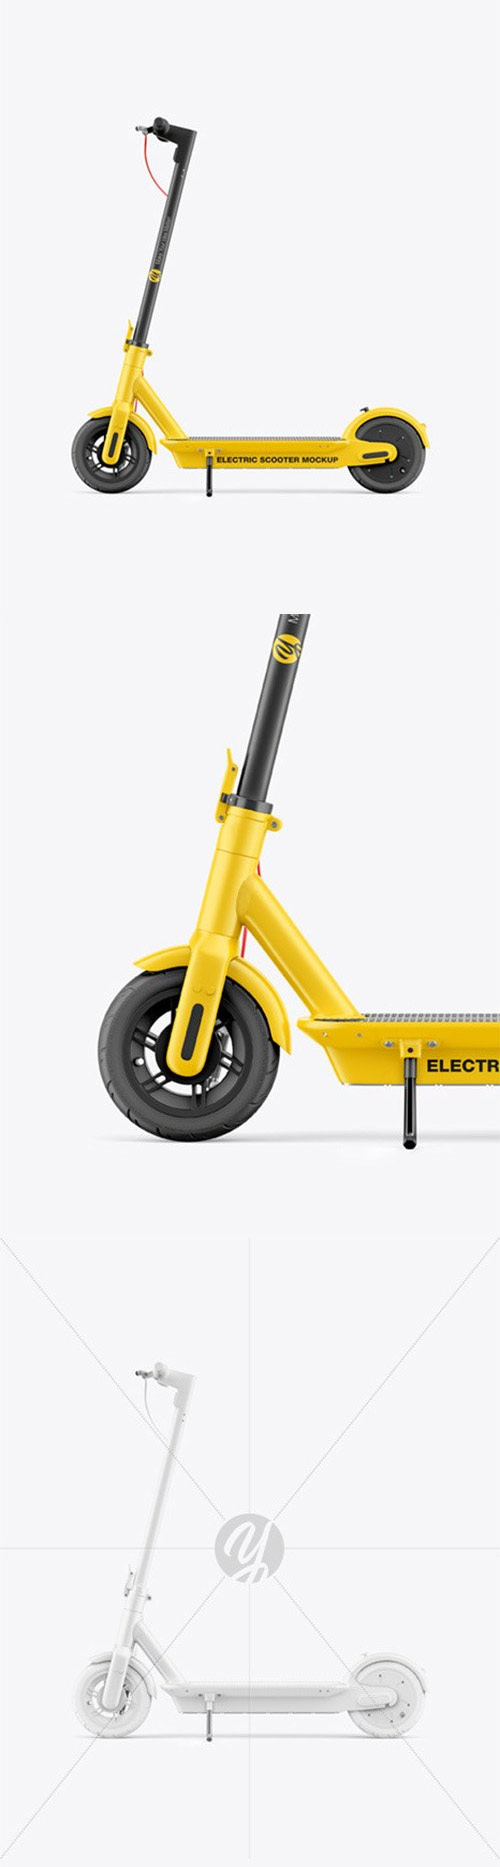 Electric Scooter Mockup - Side View 86115